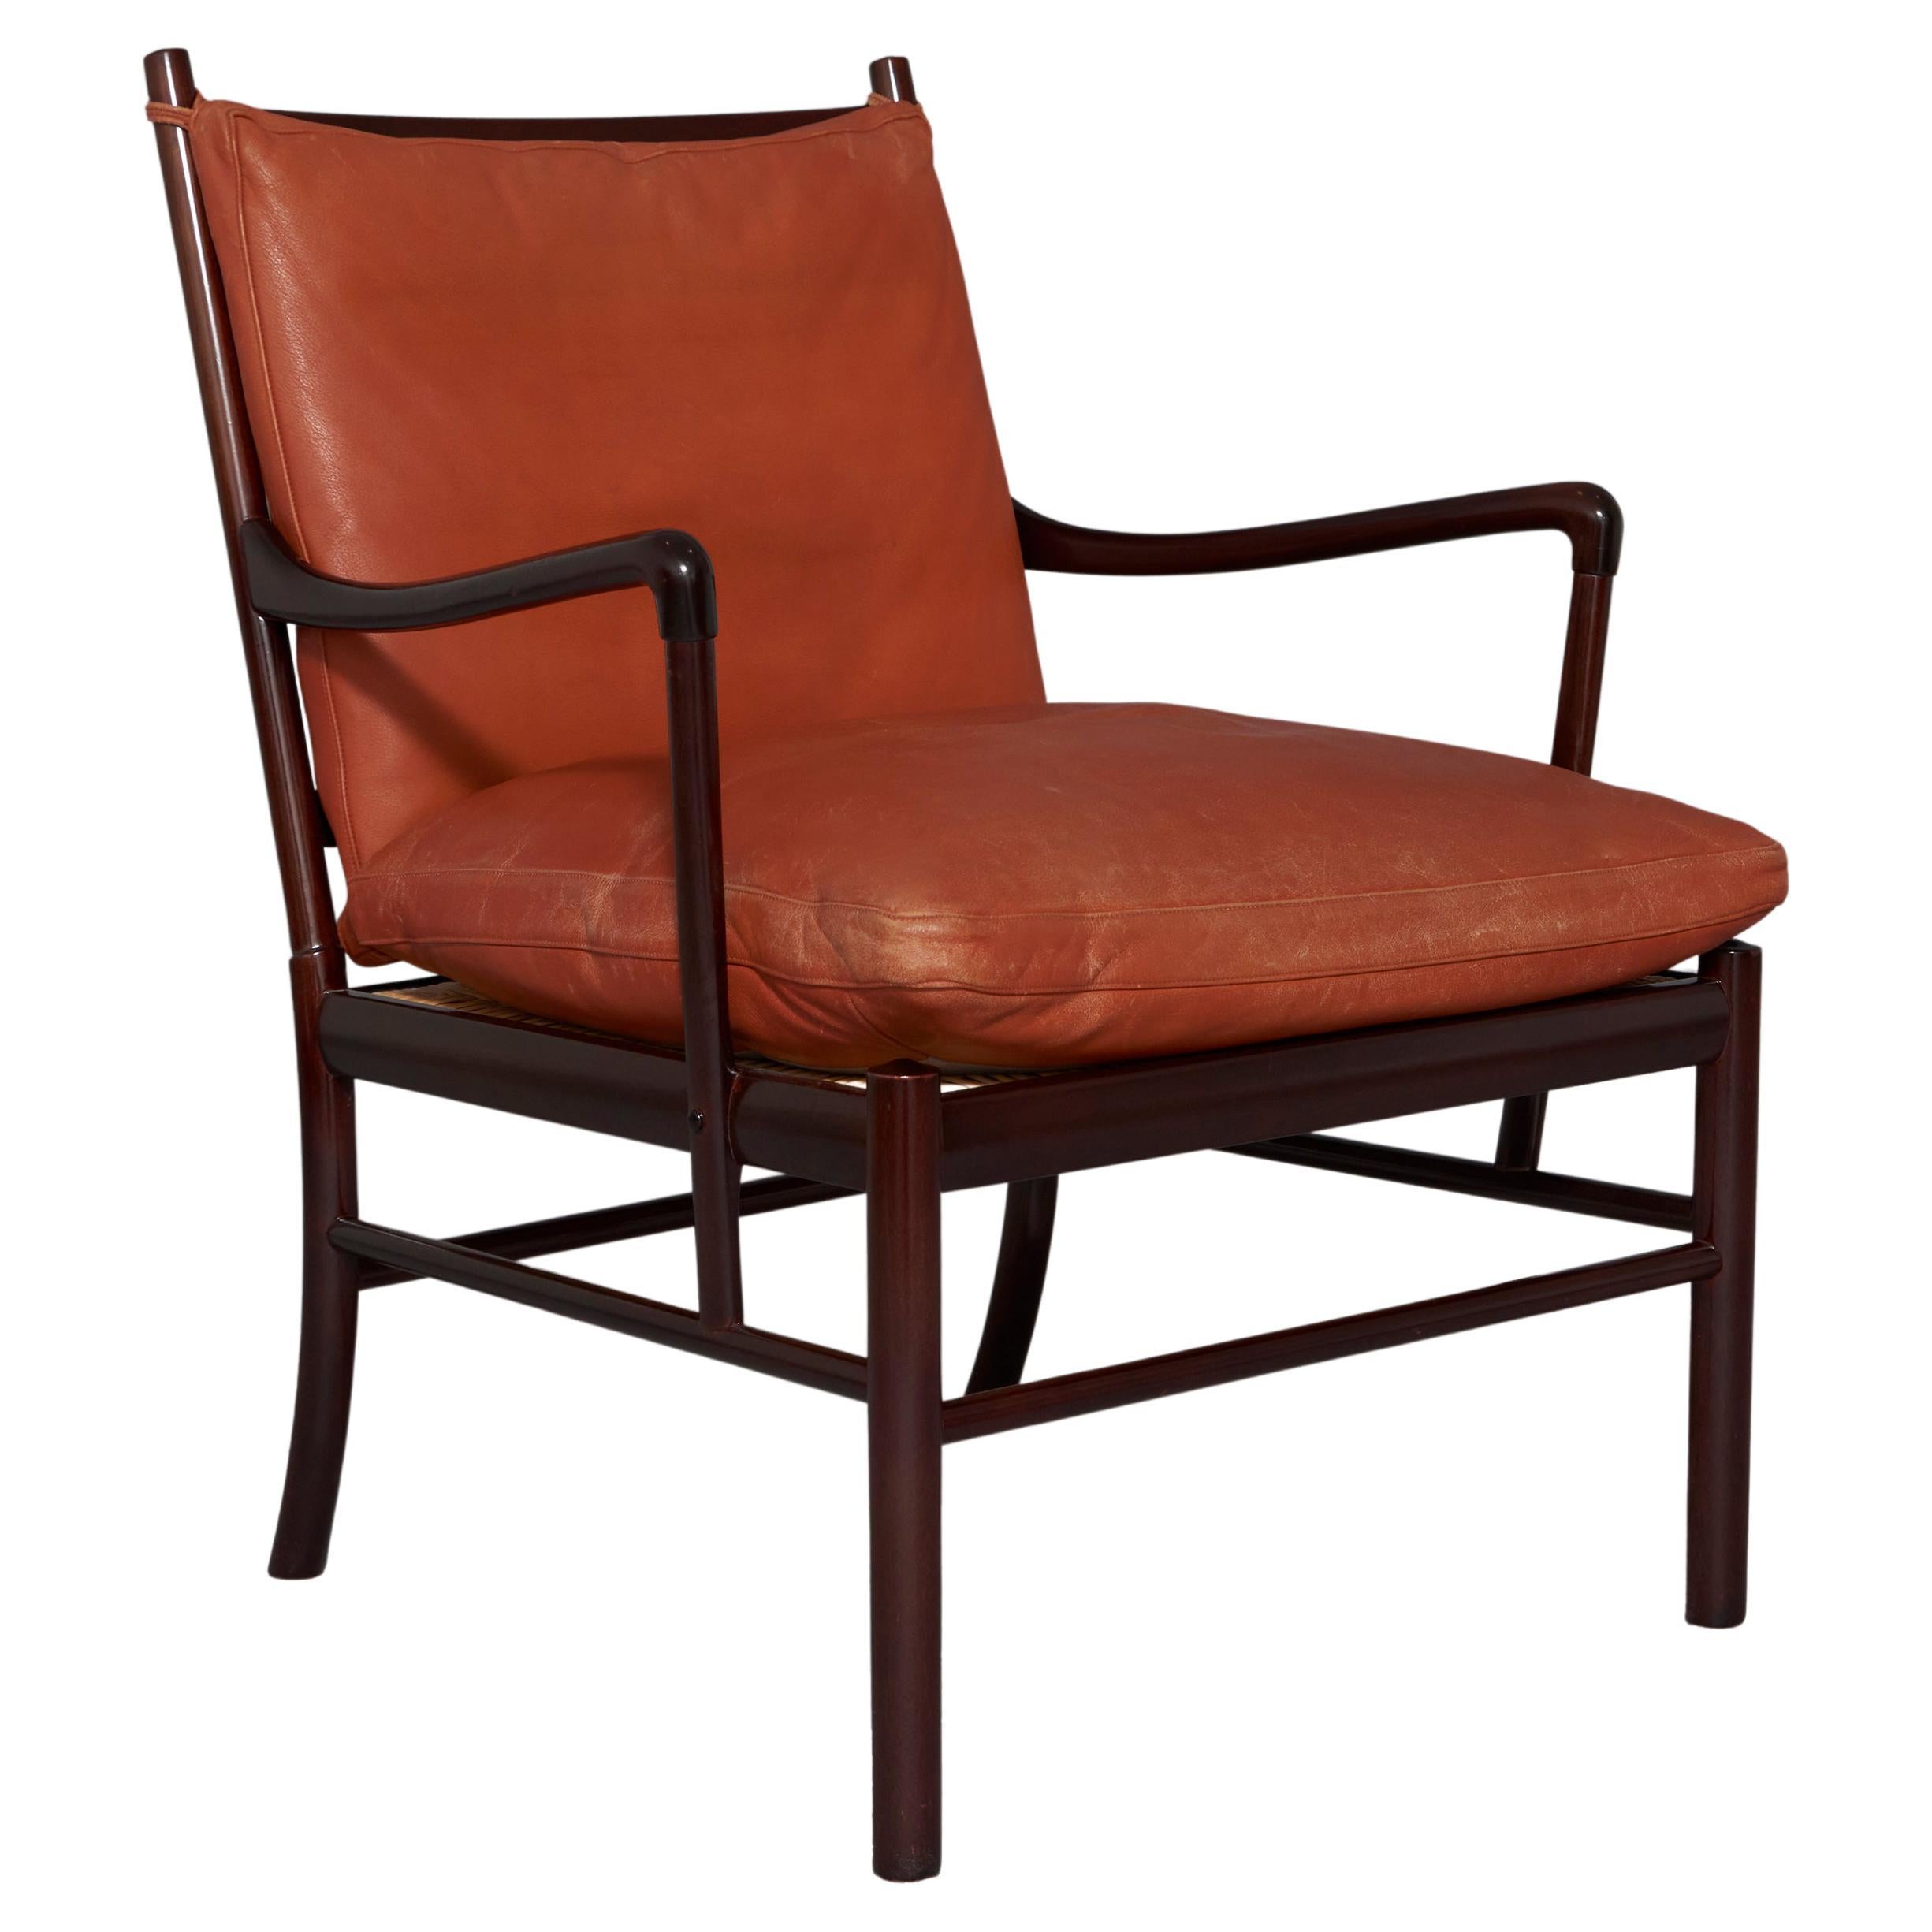 1960’s Ole Wanscher ‘OW 149’ or ‘Colonial’ Armchair in Mahogany and Leather For Sale